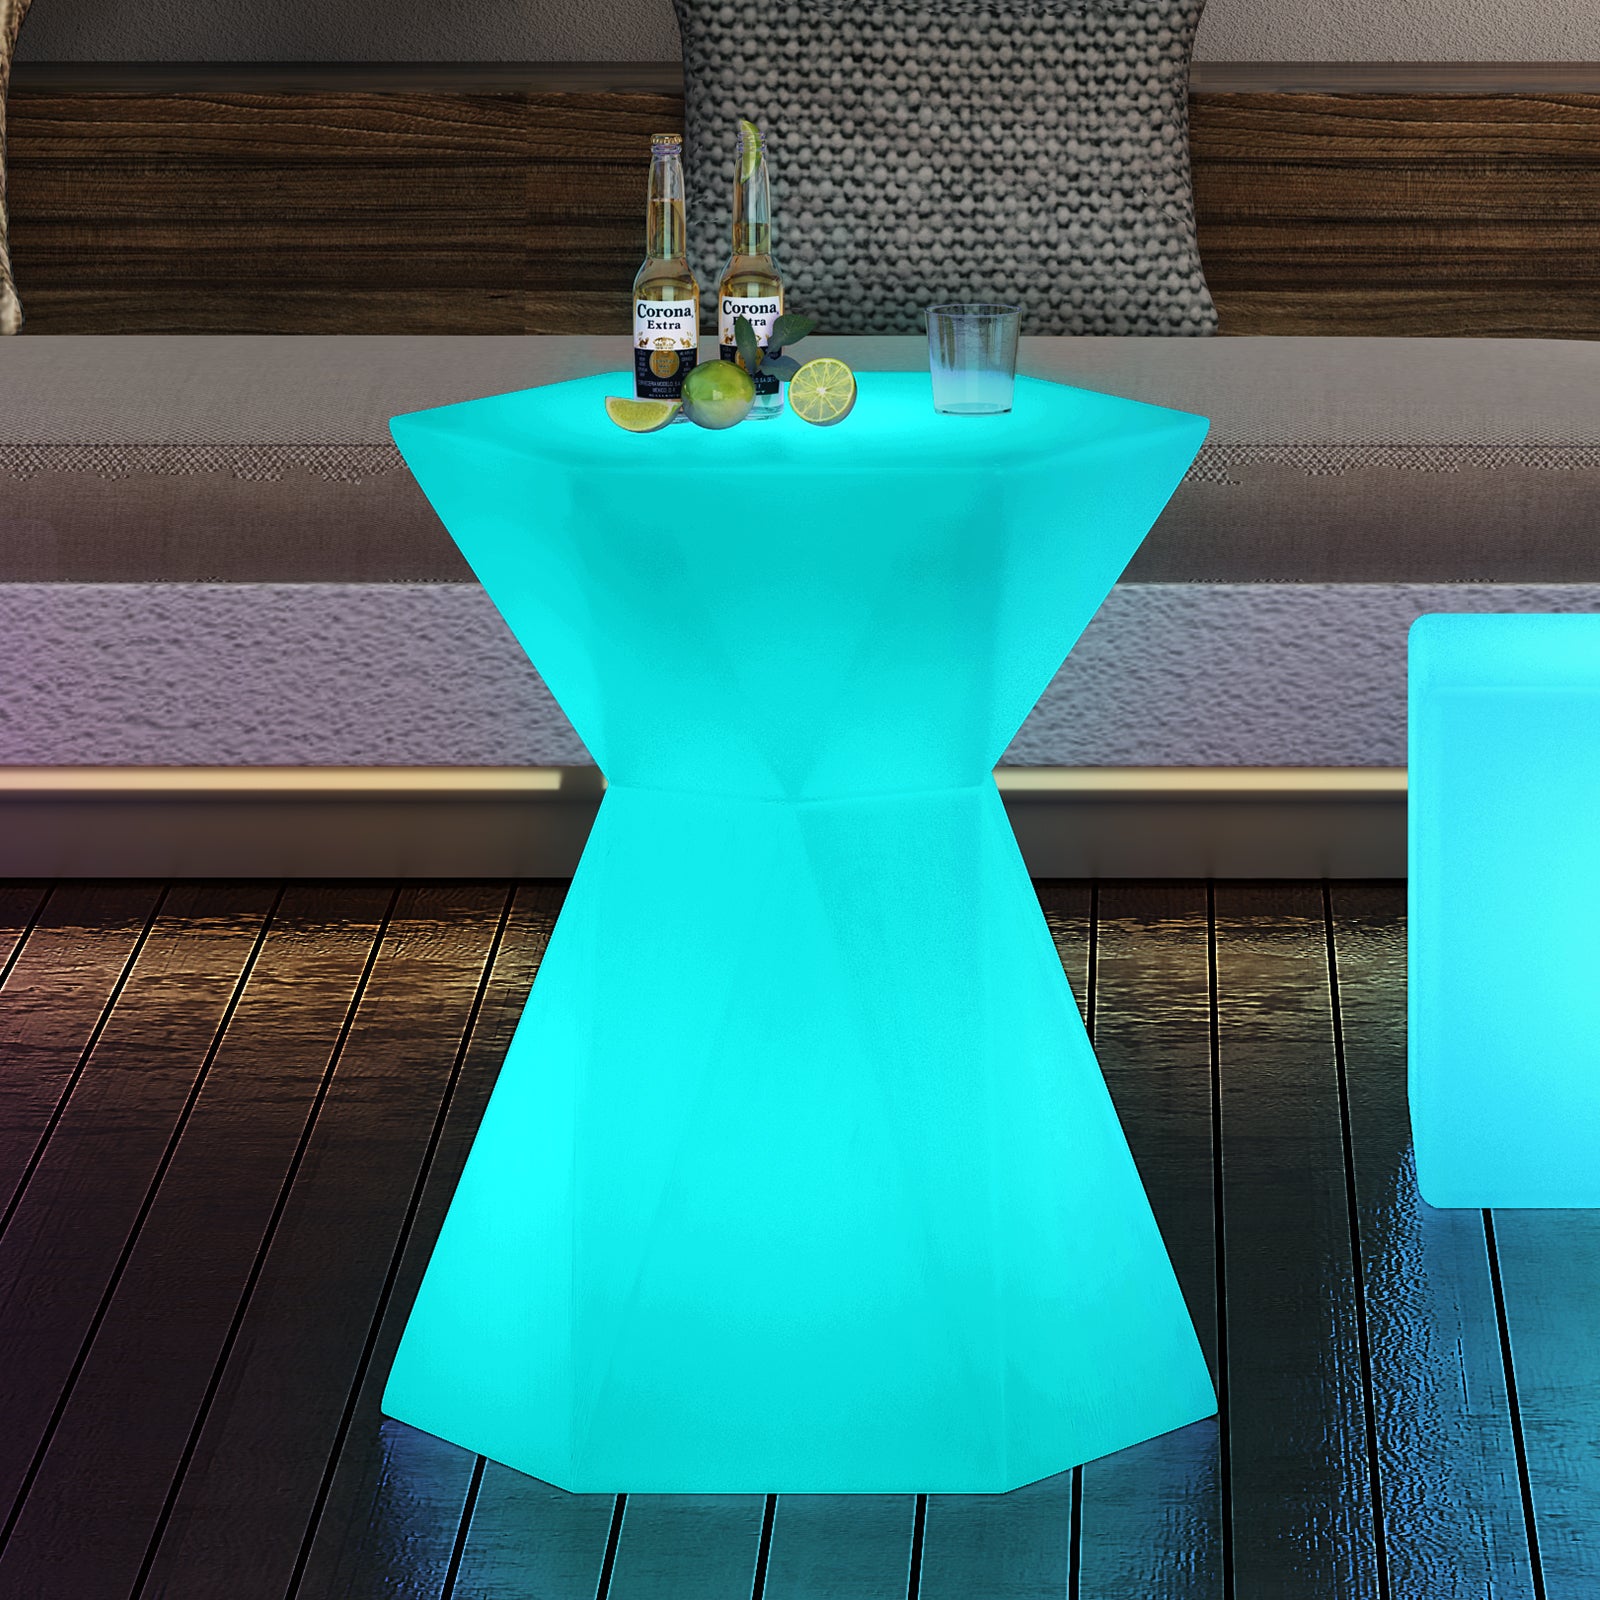 Mjkone Changing Colors LED Cocktail Table with Slim Waist, 20" Light Up Wine Table Cordless LED Cocktail Table, Rechargeable Light Up Pub Table for Party, Home Patio Pool Ambiance LED Furniture